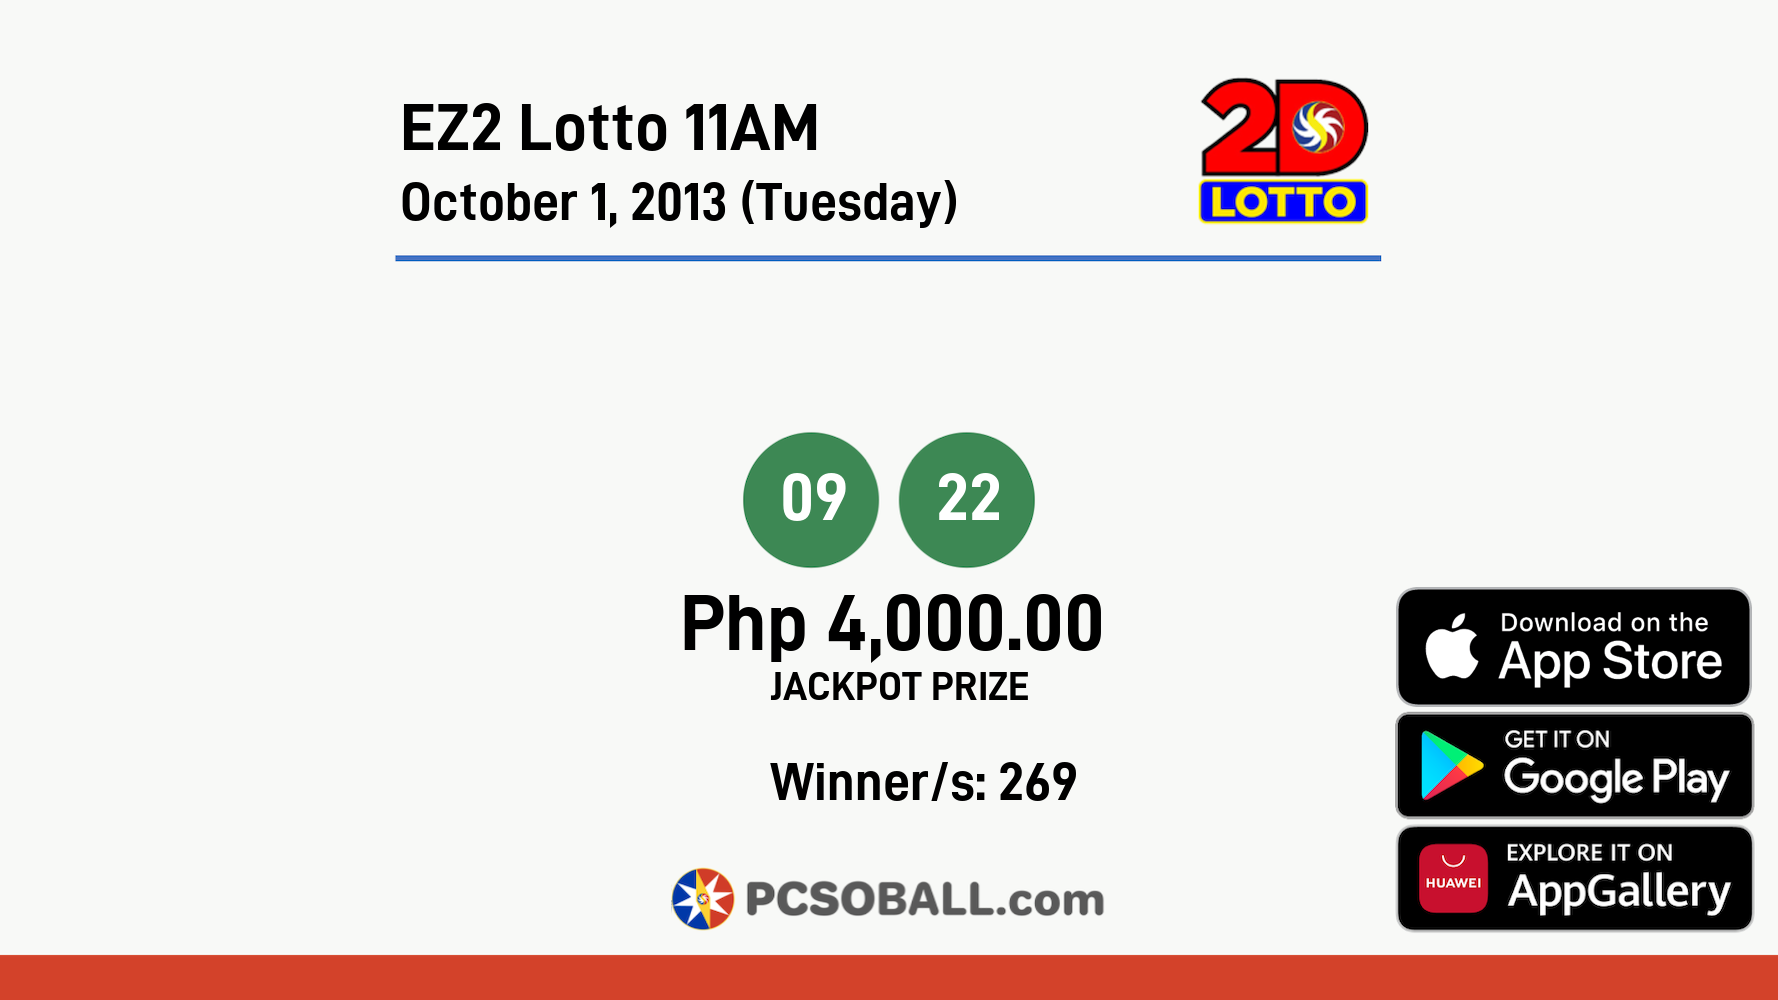 EZ2 Lotto 11AM October 1, 2013 (Tuesday) Result